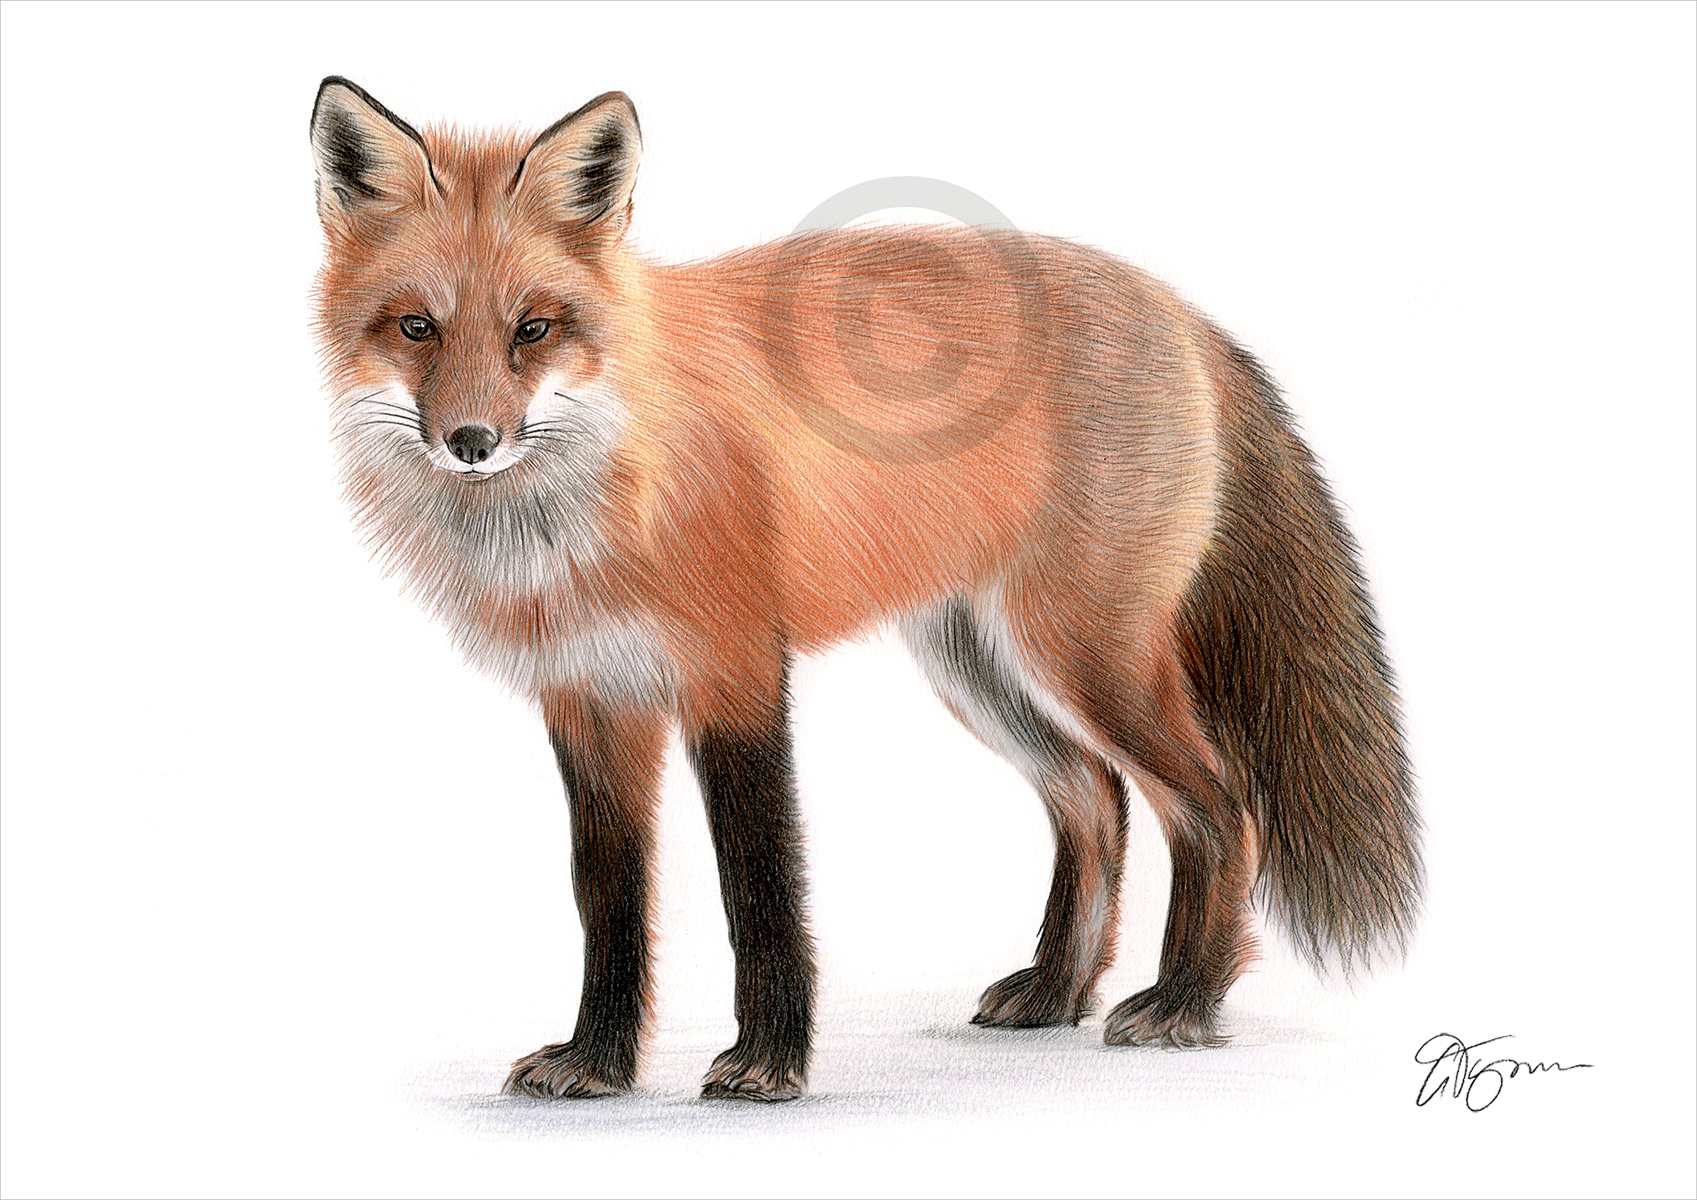 Colour pencil drawing of a red fox in landscape by artist Gary Tymon